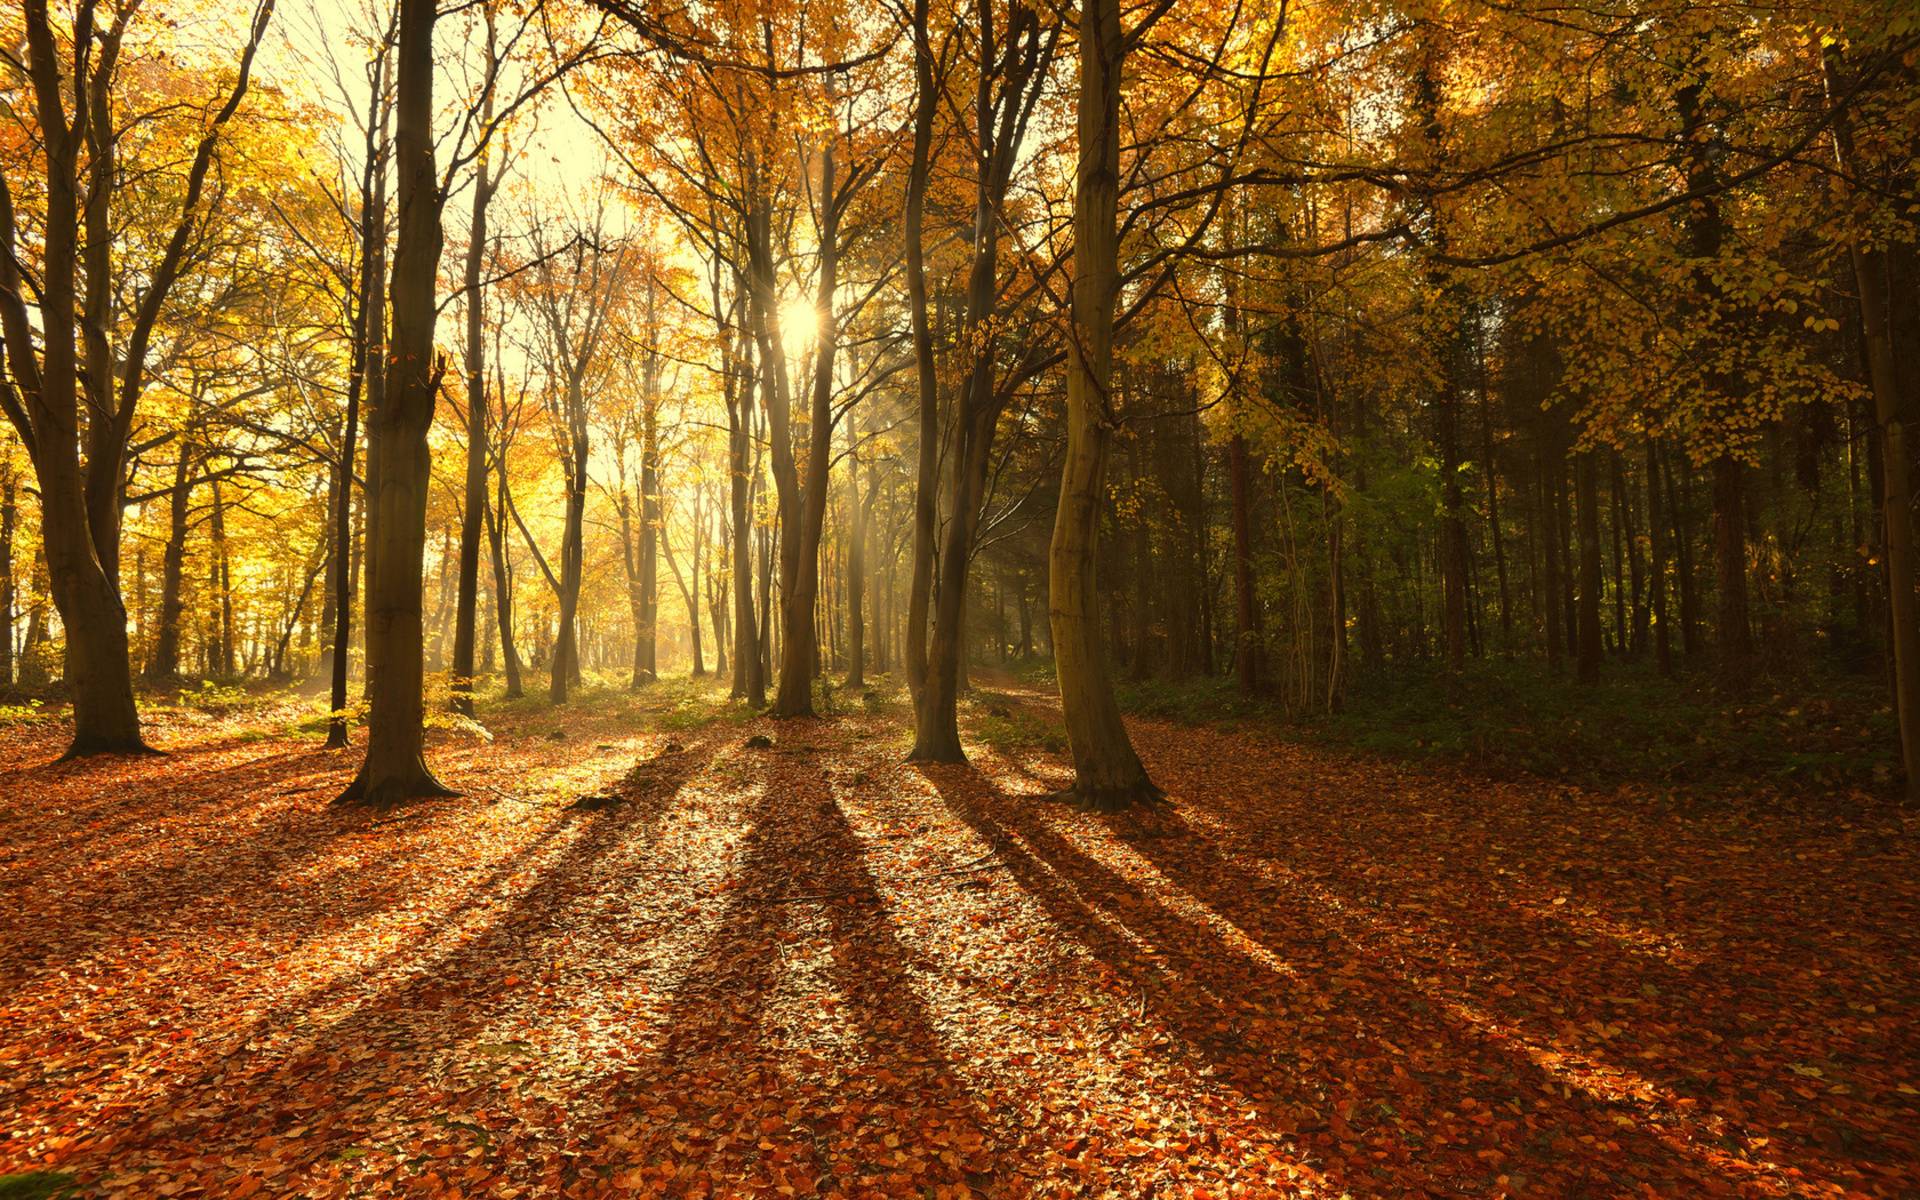 Landscapes trees forests autumn fall leaves sunlight sunbeams